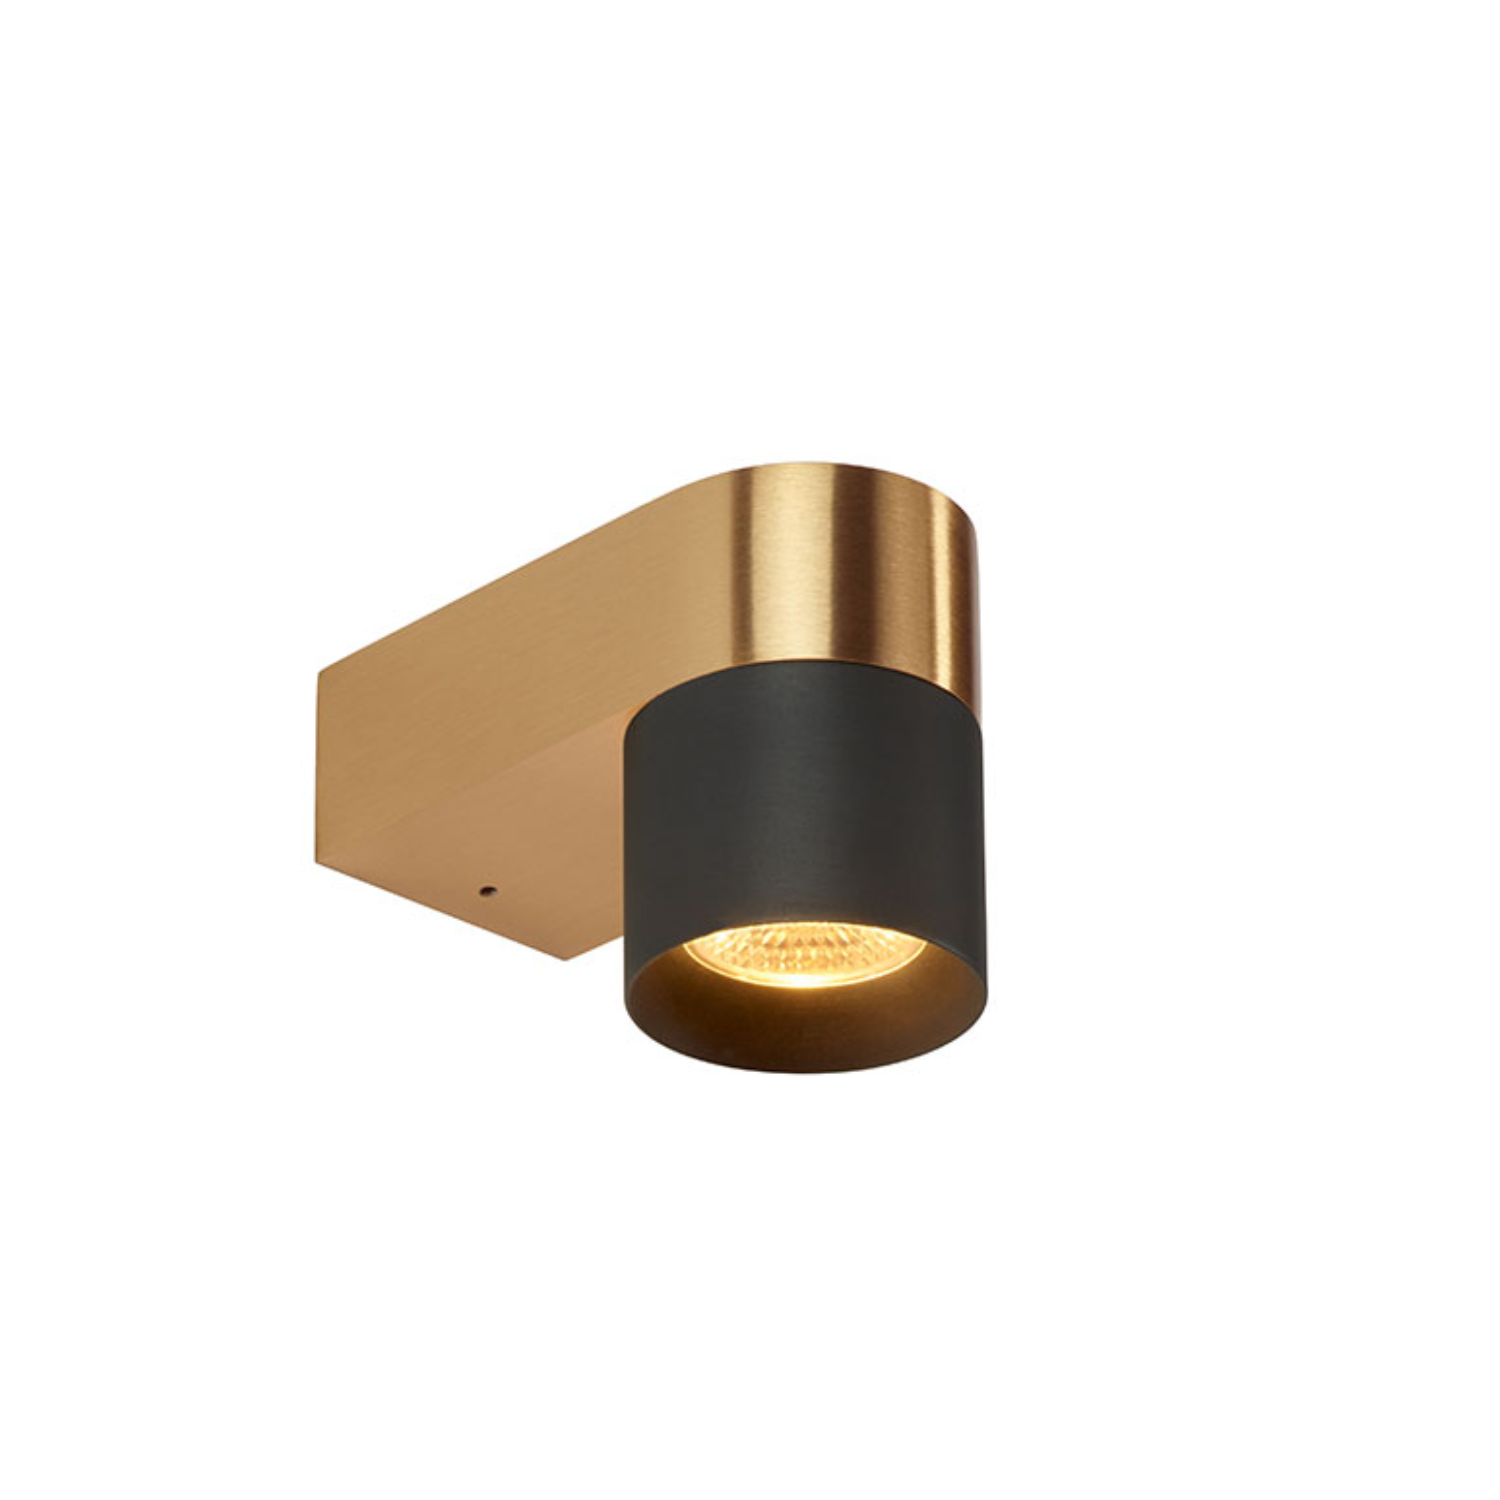 AUDY-WALL 1S DUO - Wall Light